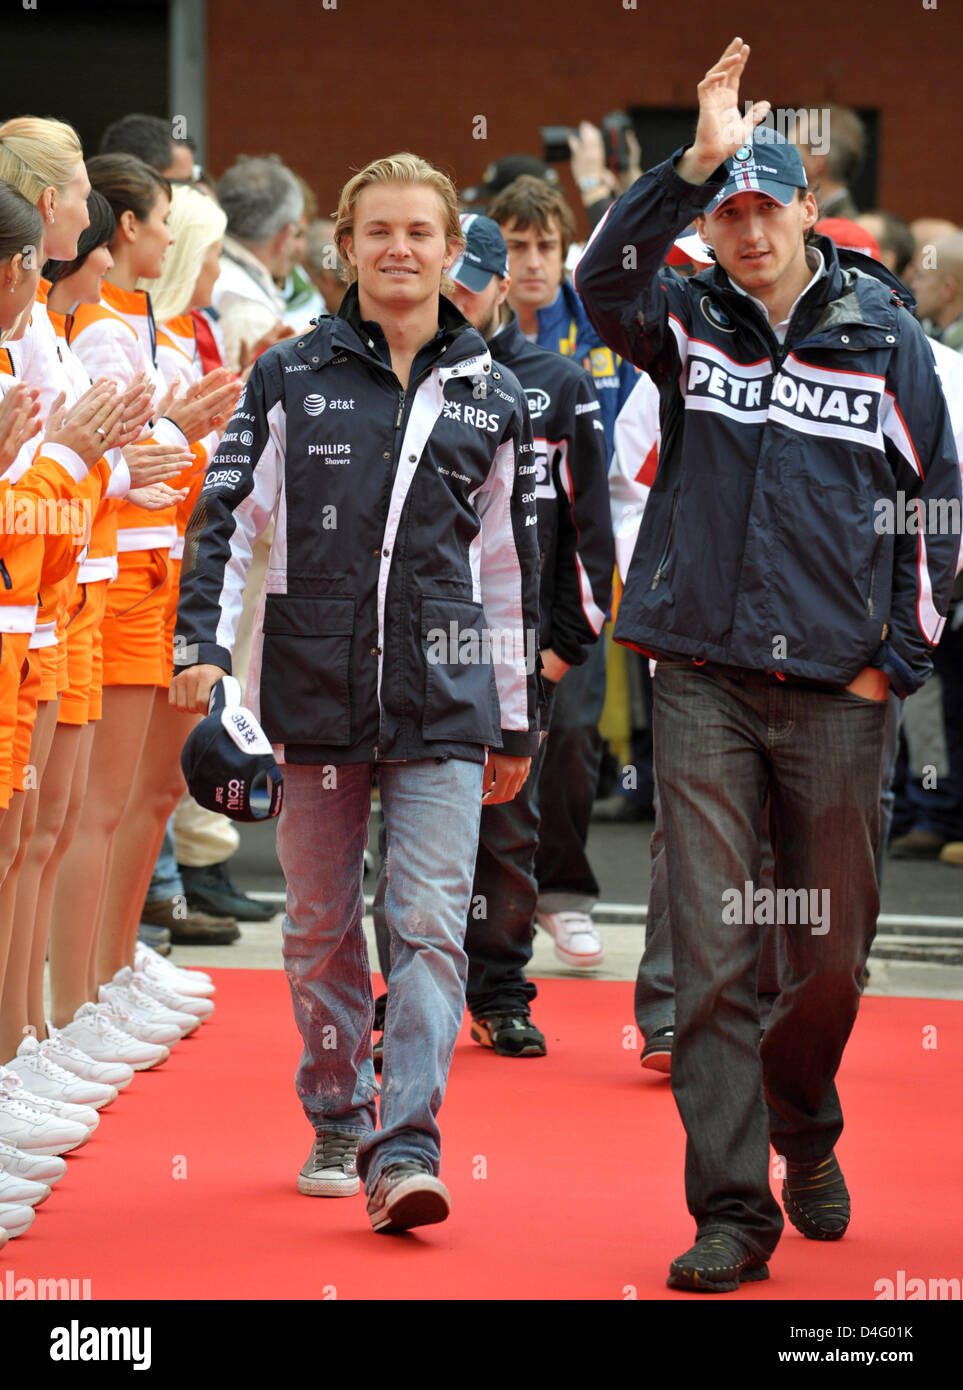 German Formula One driver Nico Rosberg (L) of Williams and Polish Formula One driver Robert Kubica of BMW Sauber are pictured at the drivers parade prior to the start of the Formular One Grand Prix of Belgium at Spa-Francorchamps race tracks in Belgium, 07 September 2008. Foto: Carmen Jaspersen Stock Photo